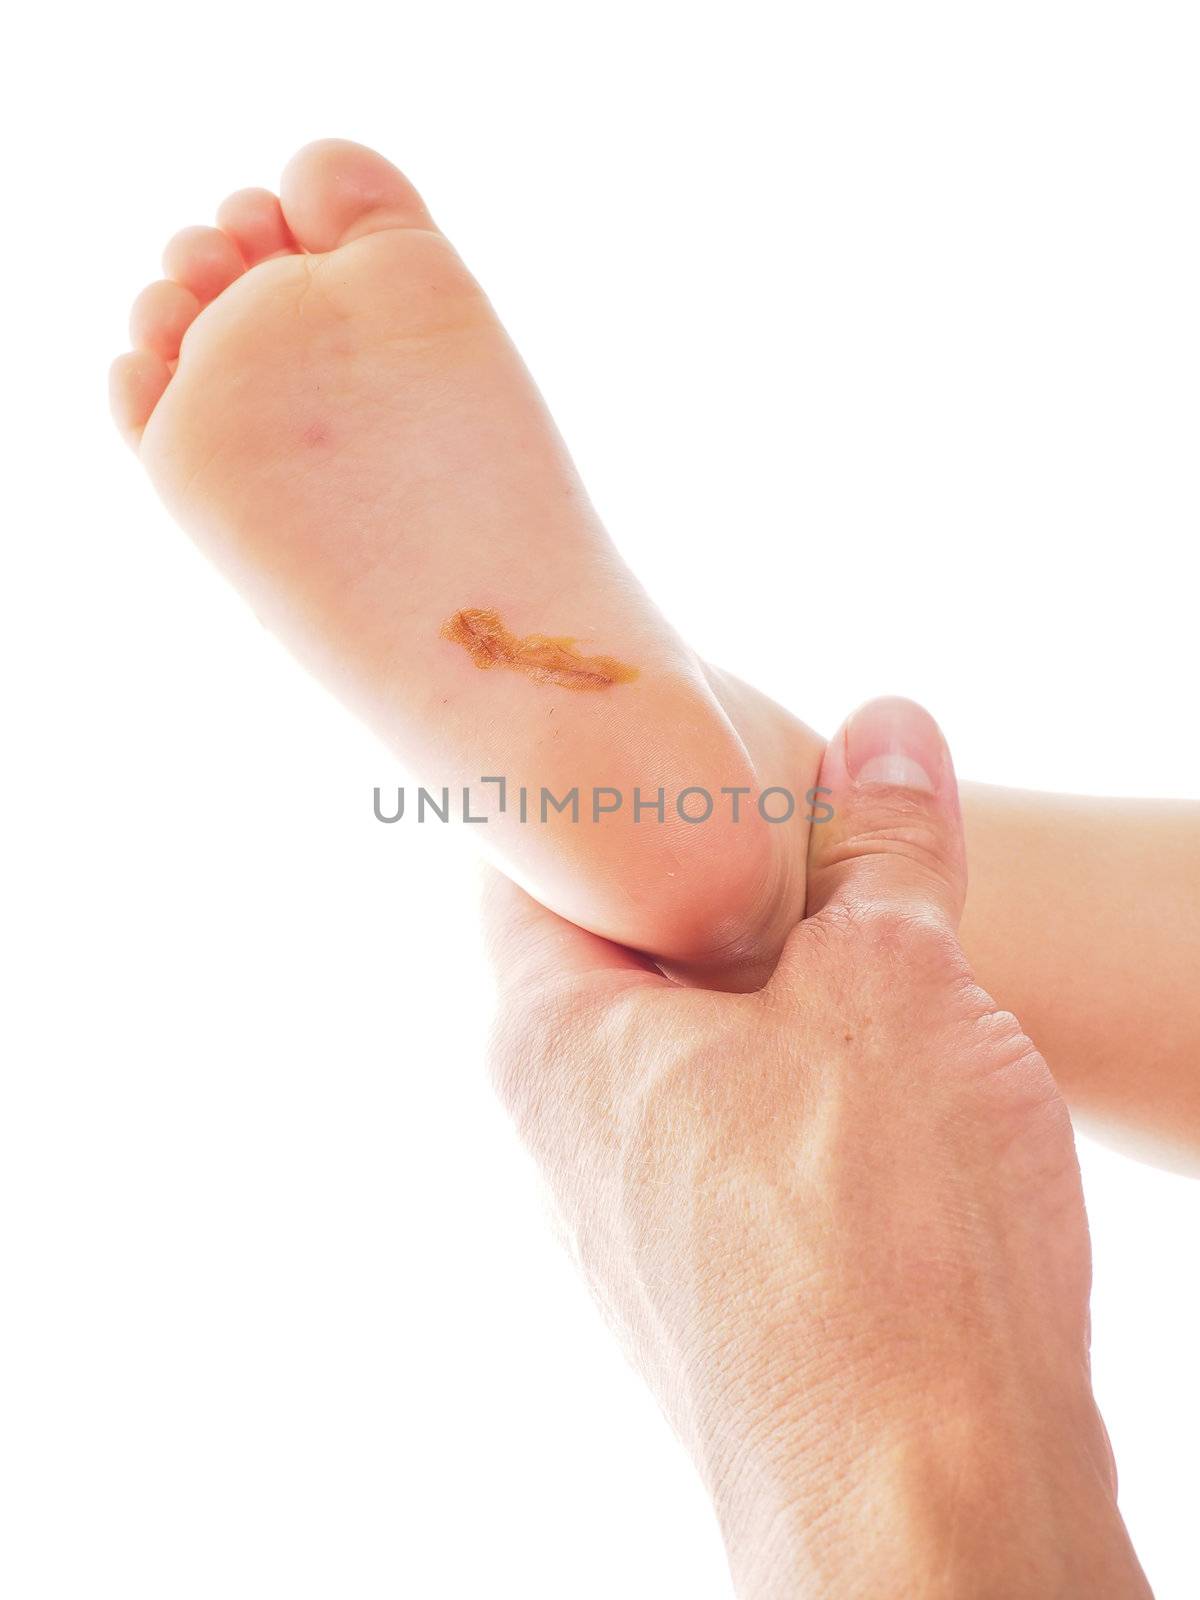 Child with a long cut under foot on heel, being examinated towards white